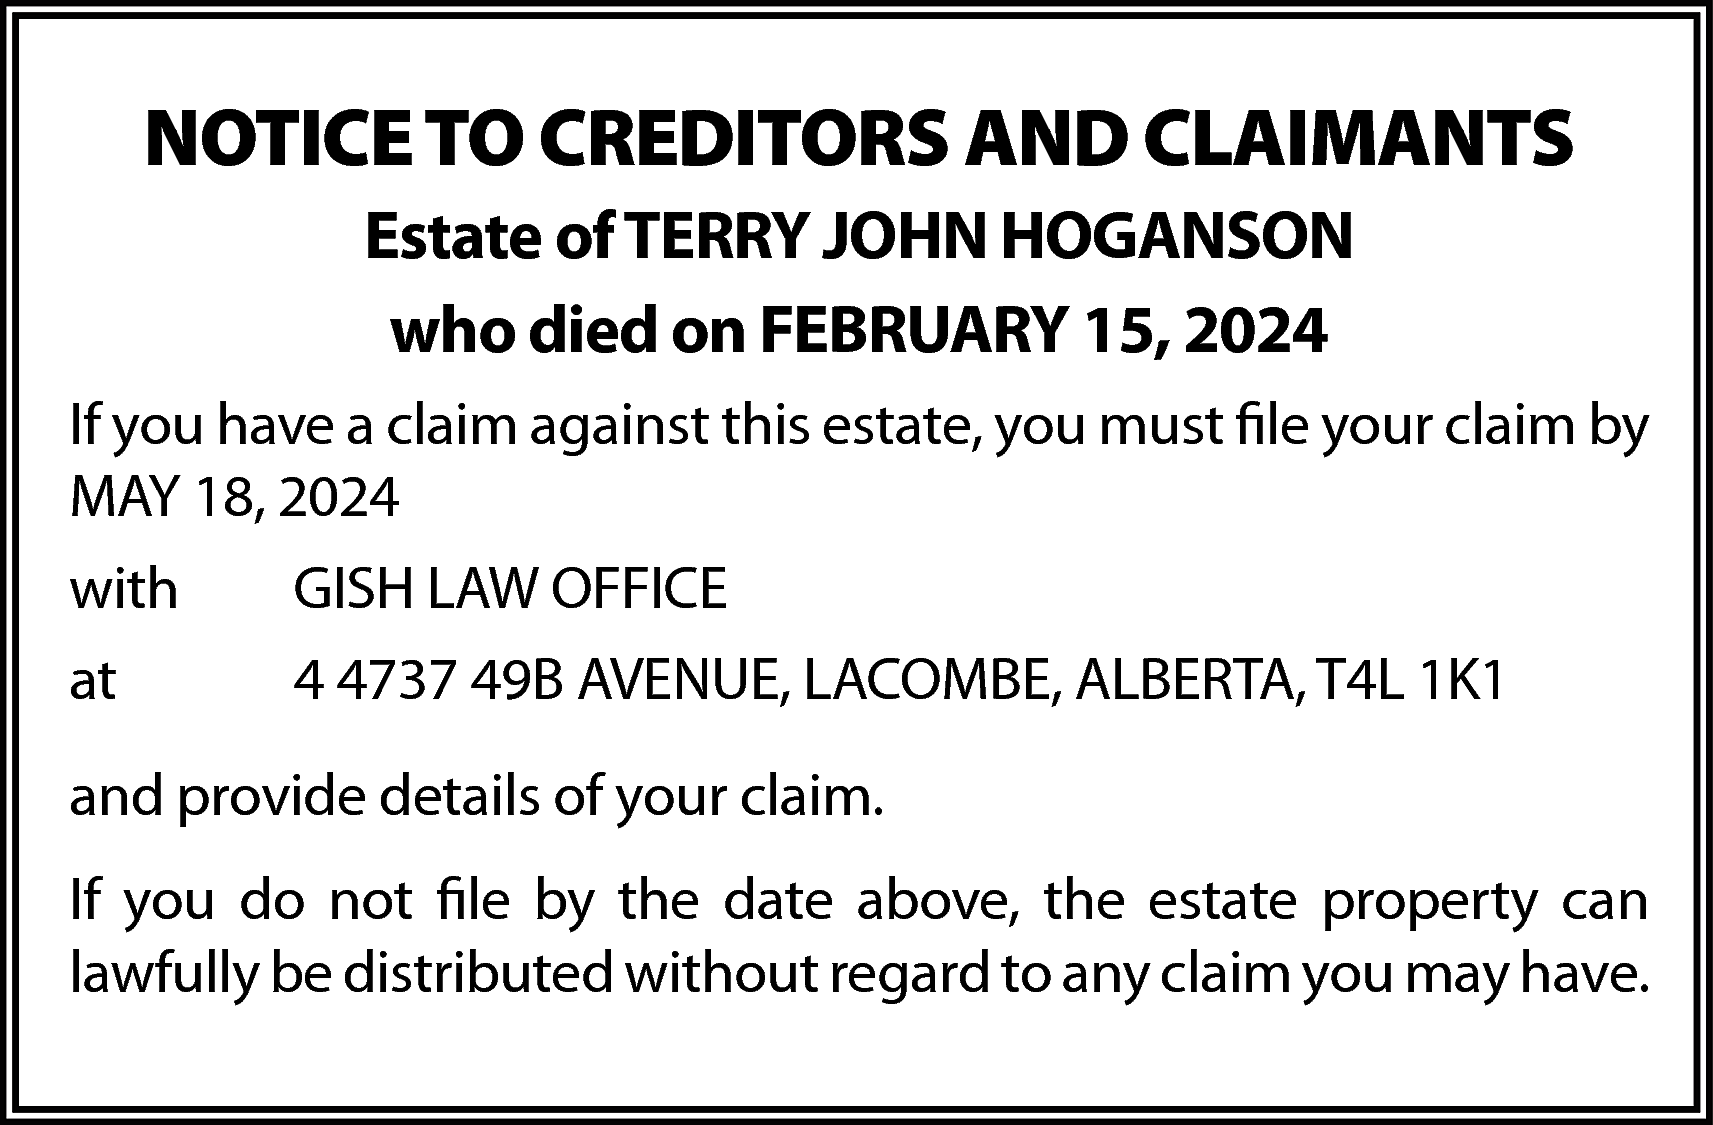 NOTICE TO CREDITORS AND CLAIMANTS  NOTICE TO CREDITORS AND CLAIMANTS  Estate of TERRY JOHN HOGANSON  who died on FEBRUARY 15, 2024  If you have a claim against this estate, you must file your claim by  MAY 18, 2024  with    GISH LAW OFFICE    at    4 4737 49B AVENUE, LACOMBE, ALBERTA, T4L 1K1    and provide details of your claim.  If you do not file by the date above, the estate property can  lawfully be distributed without regard to any claim you may have.    